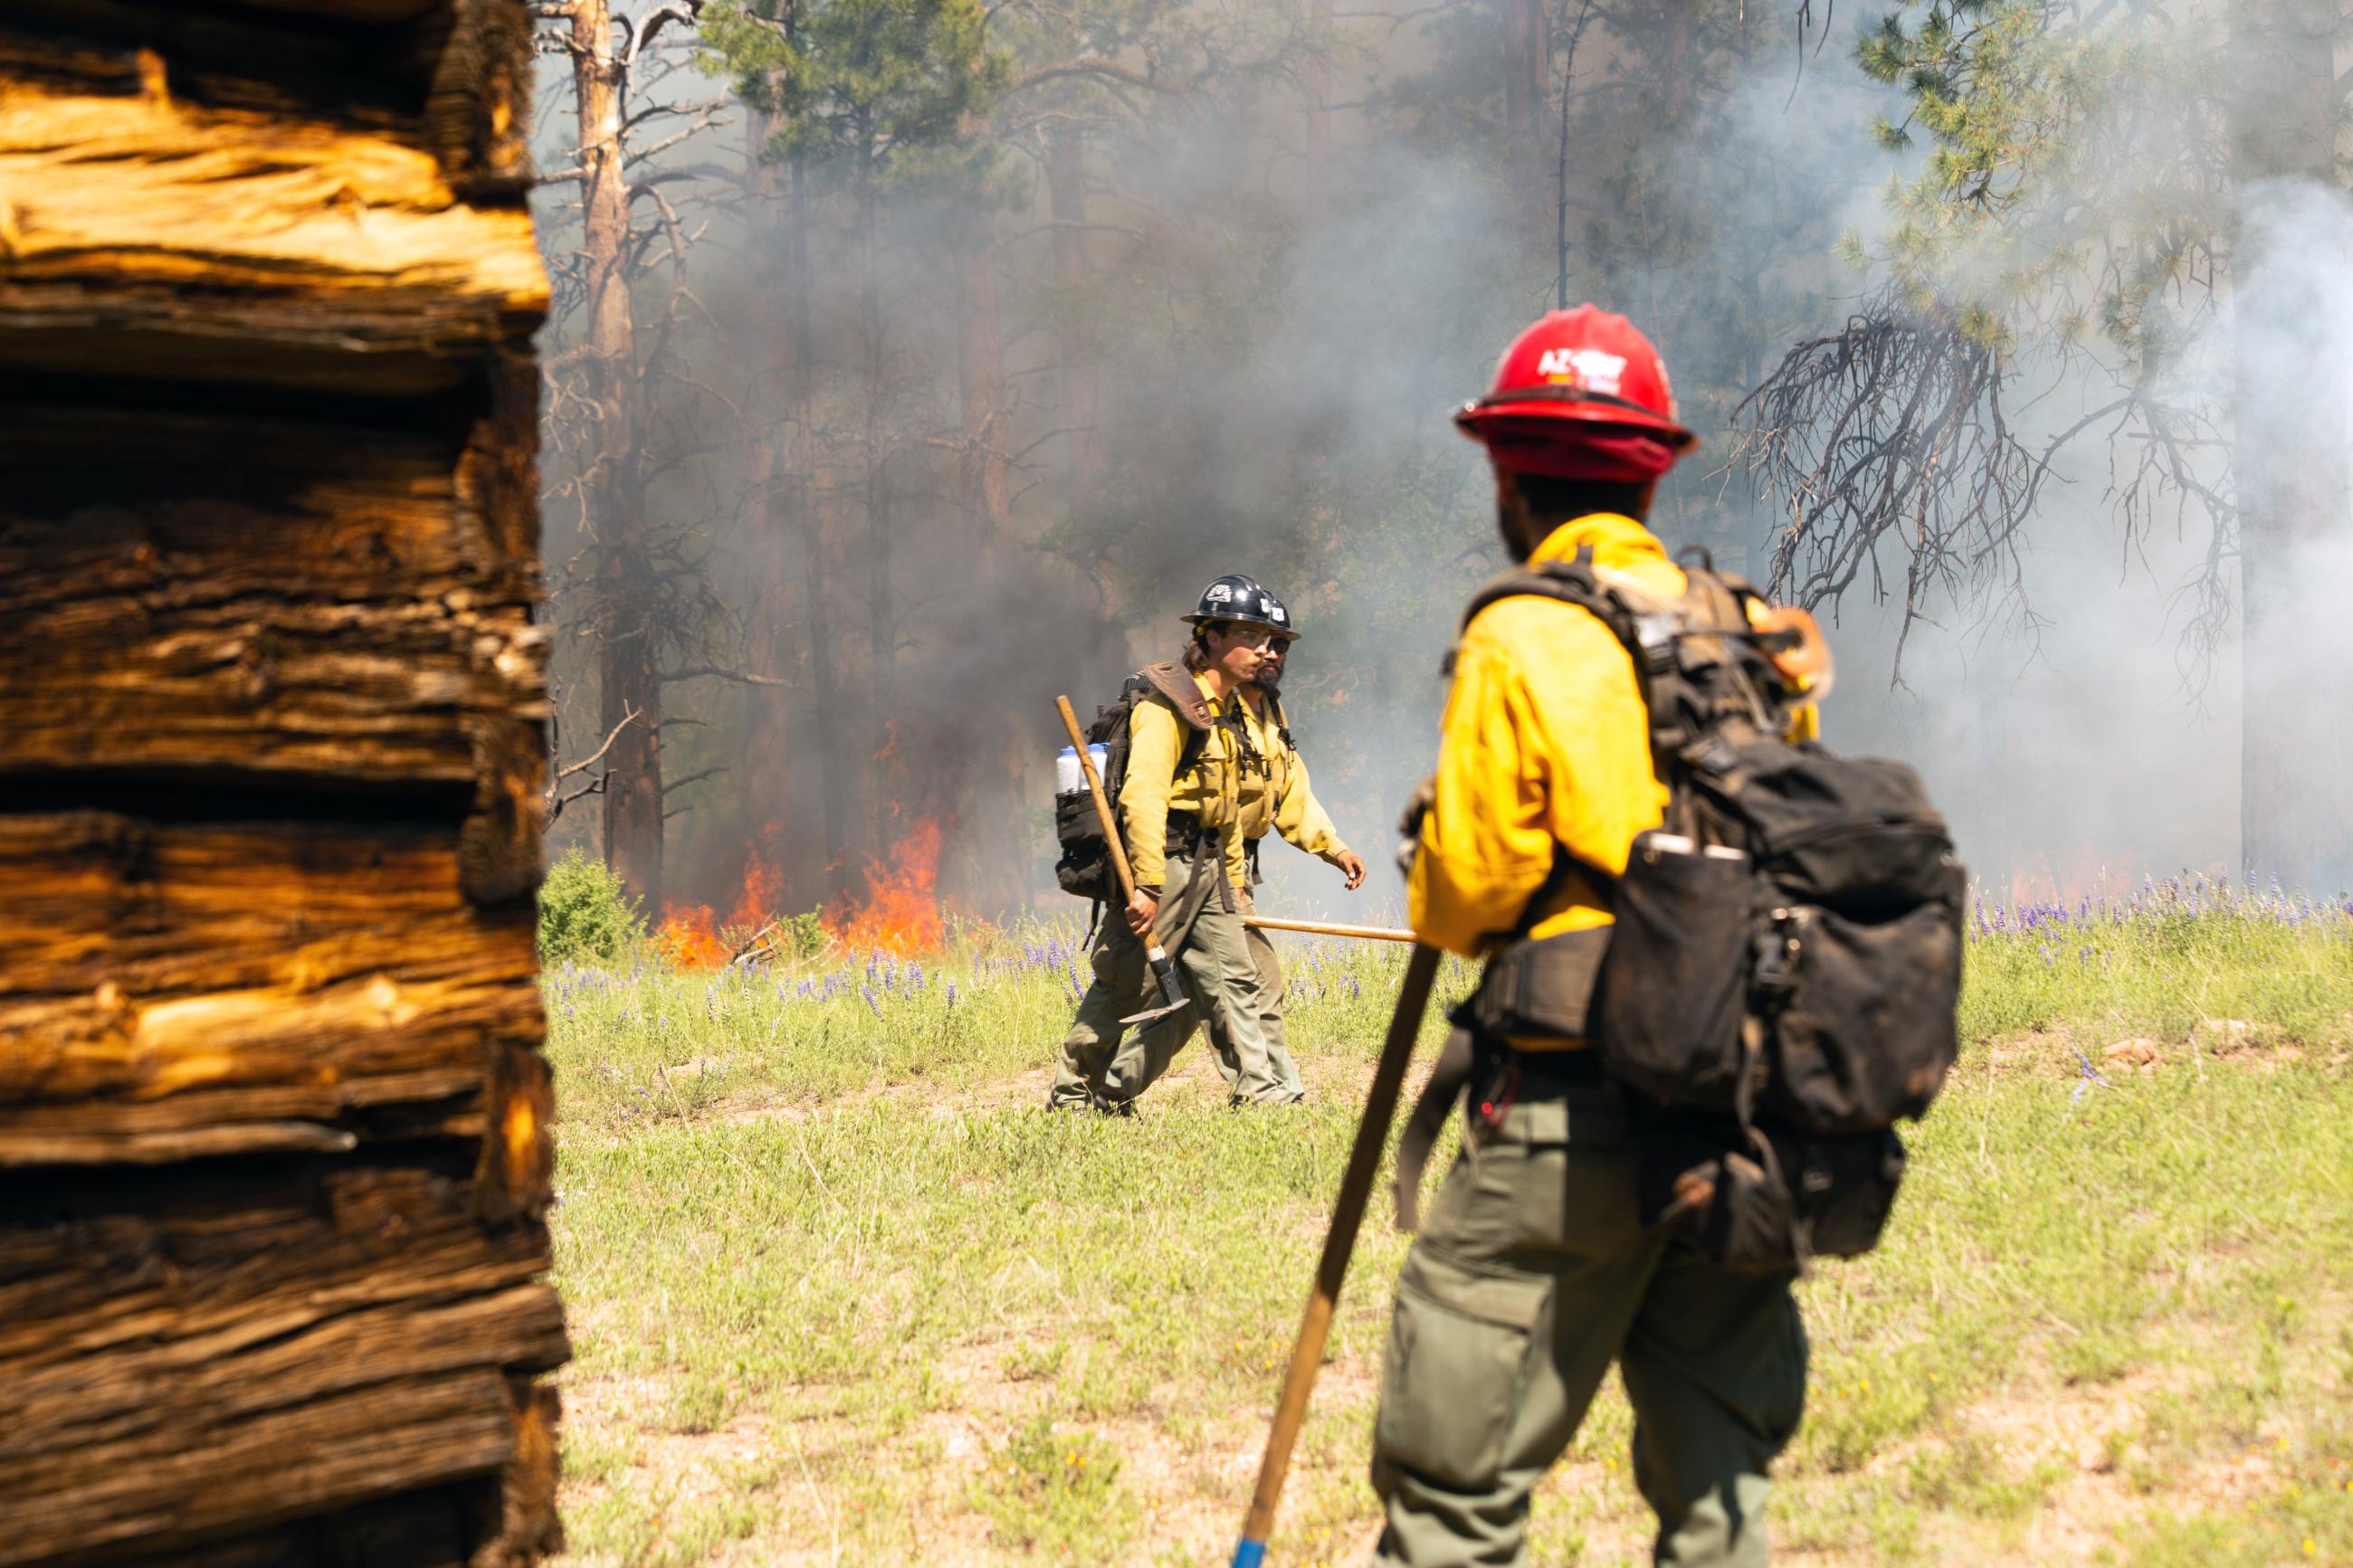 A firefighter wearing a fire pack stands next to a cabin as firefighters walk by and smoke lingers in the background.